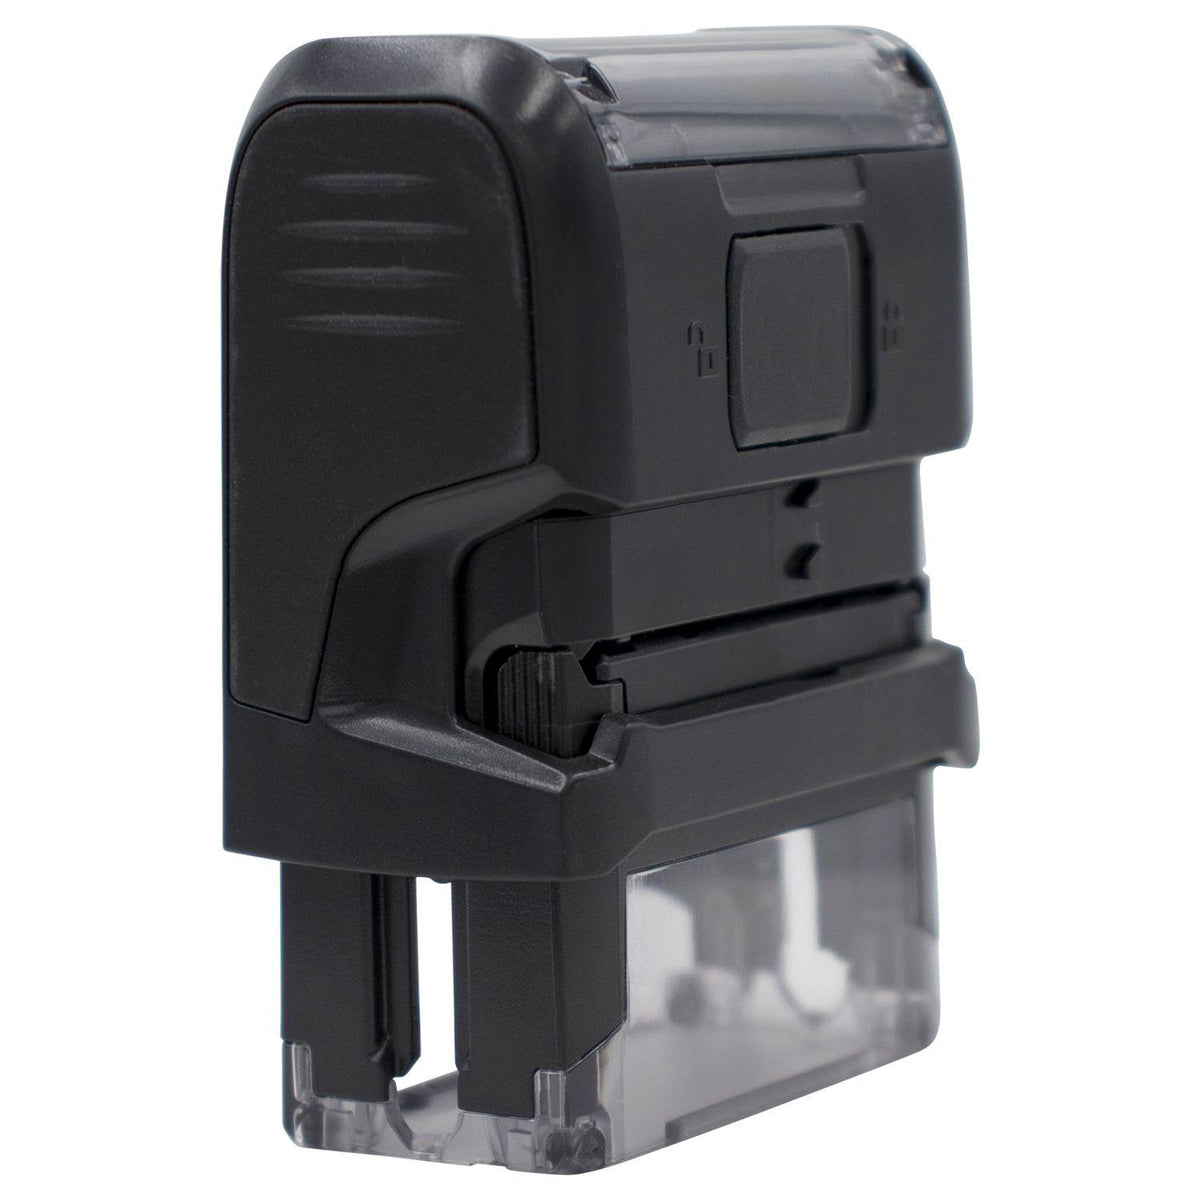 Large Self-Inking PAL Stamp - Engineer Seal Stamps - Brand_Trodat, Impression Size_Large, Stamp Type_Self-Inking Stamp, Type of Use_General, Type of Use_Office